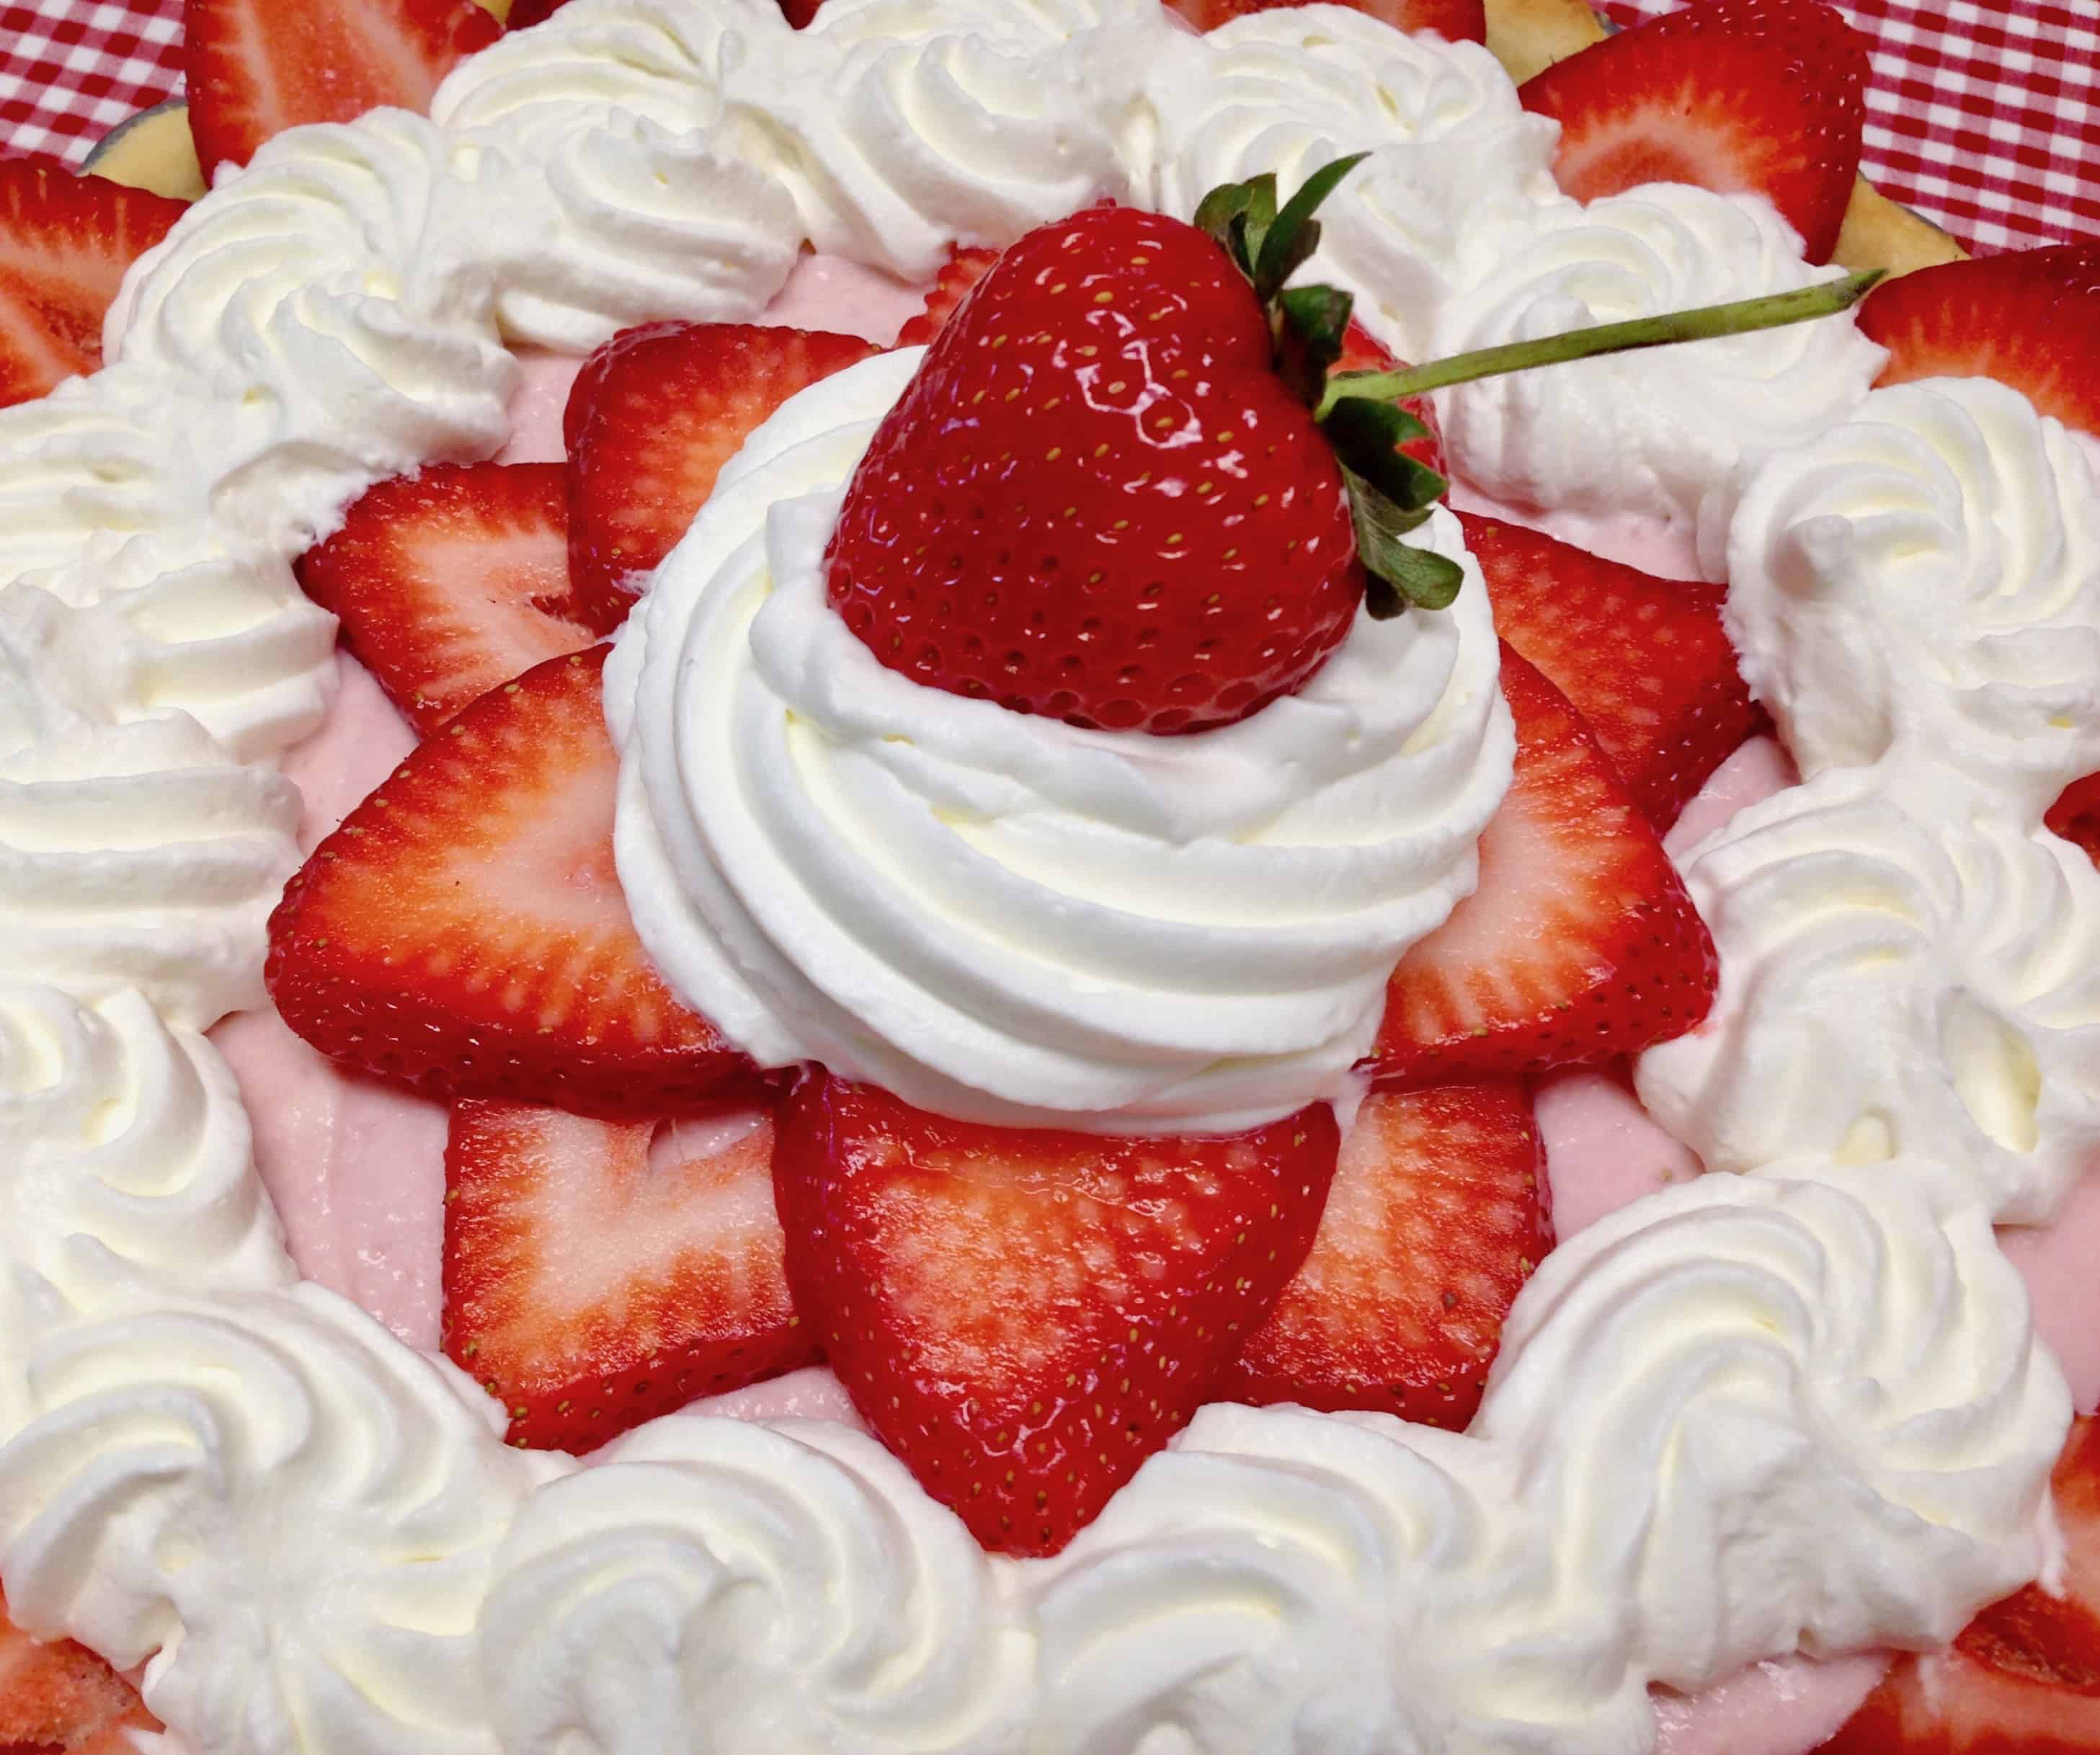 top of strawberry tart with whip cream piped over fresh strawberries